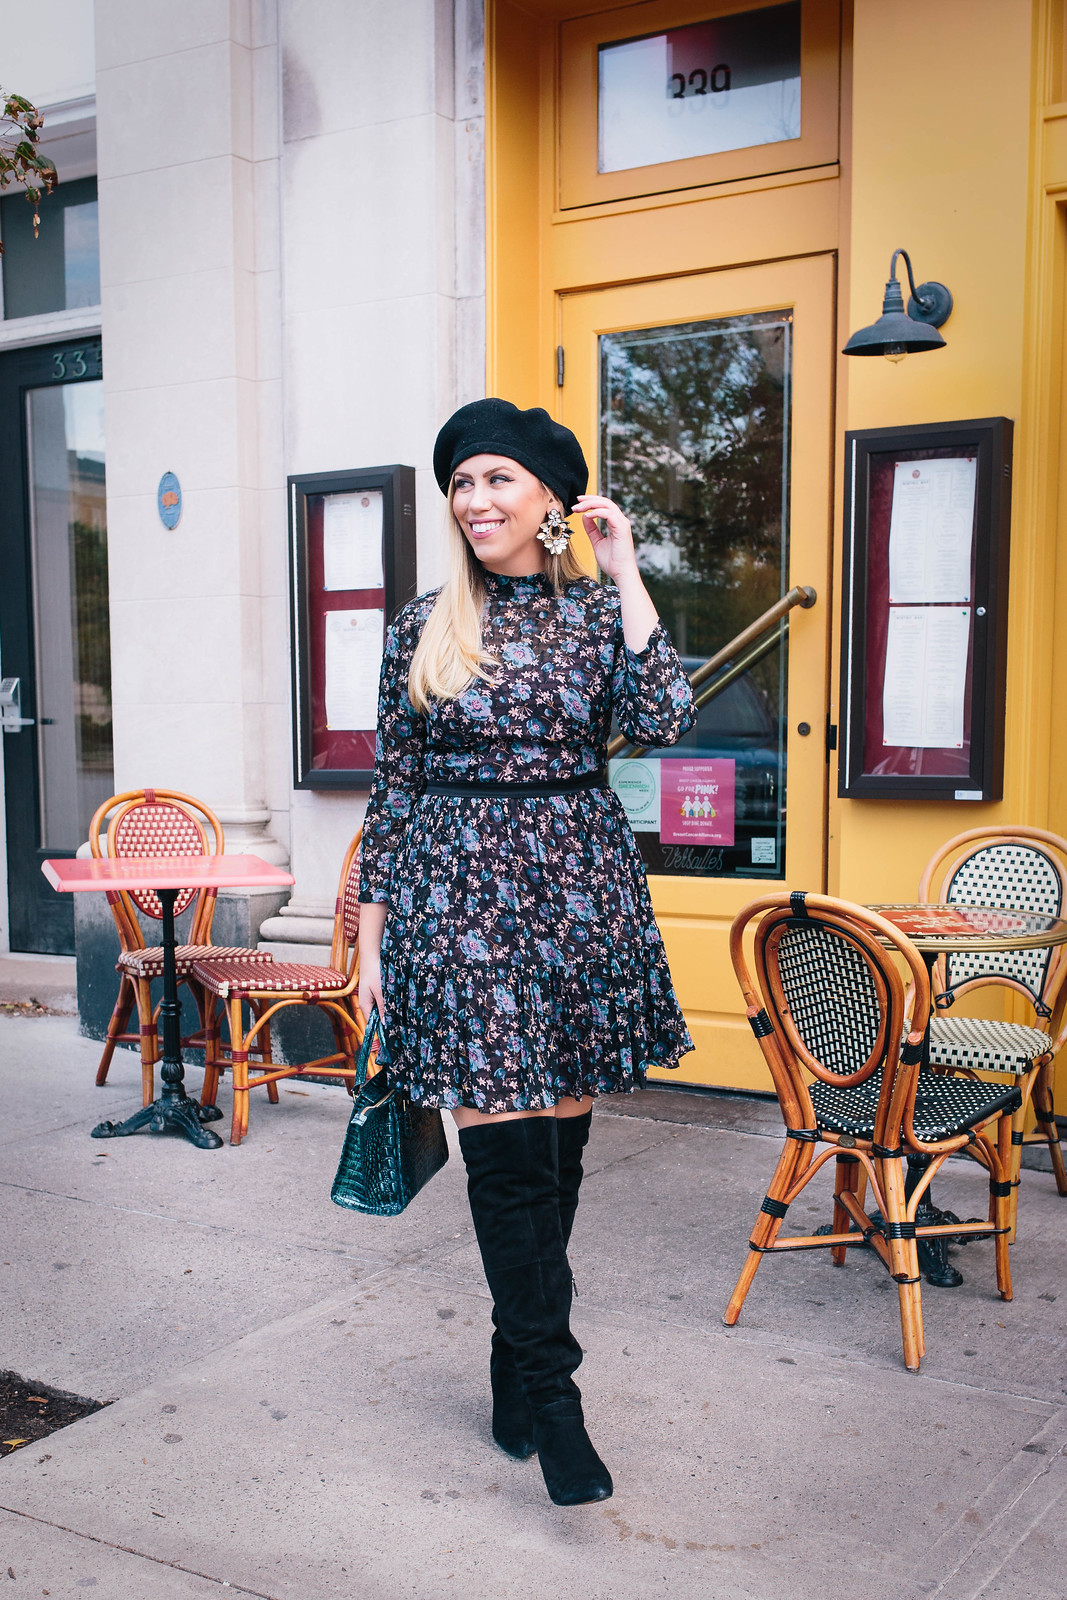 My Favorite Non-Traditional Holiday Outfit | Rebecca Taylor Solstice Silk Blend Dress Black Suede OTK Boots